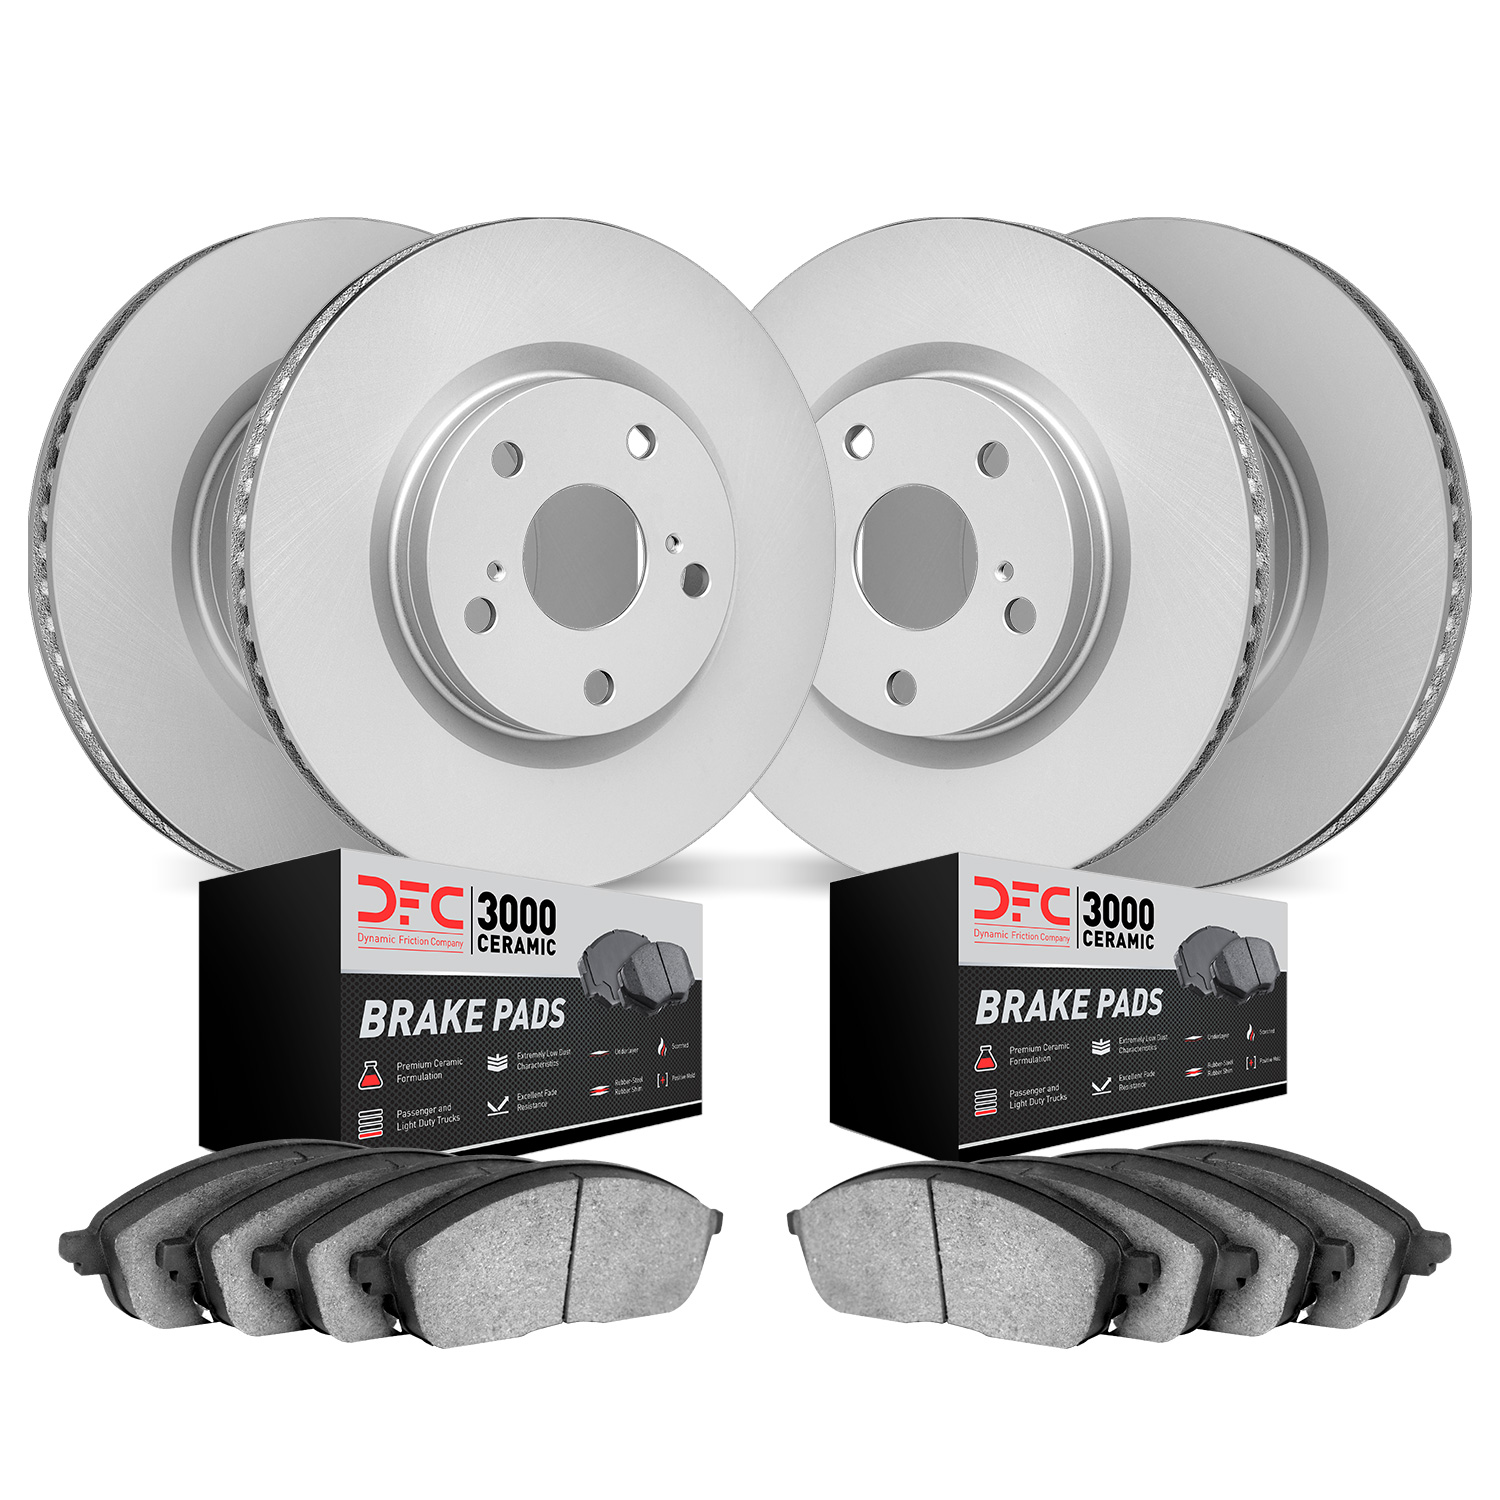 4304-31040 Geospec Brake Rotors with 3000-Series Ceramic Brake Pads Kit, 2006-2007 BMW, Position: Front and Rear